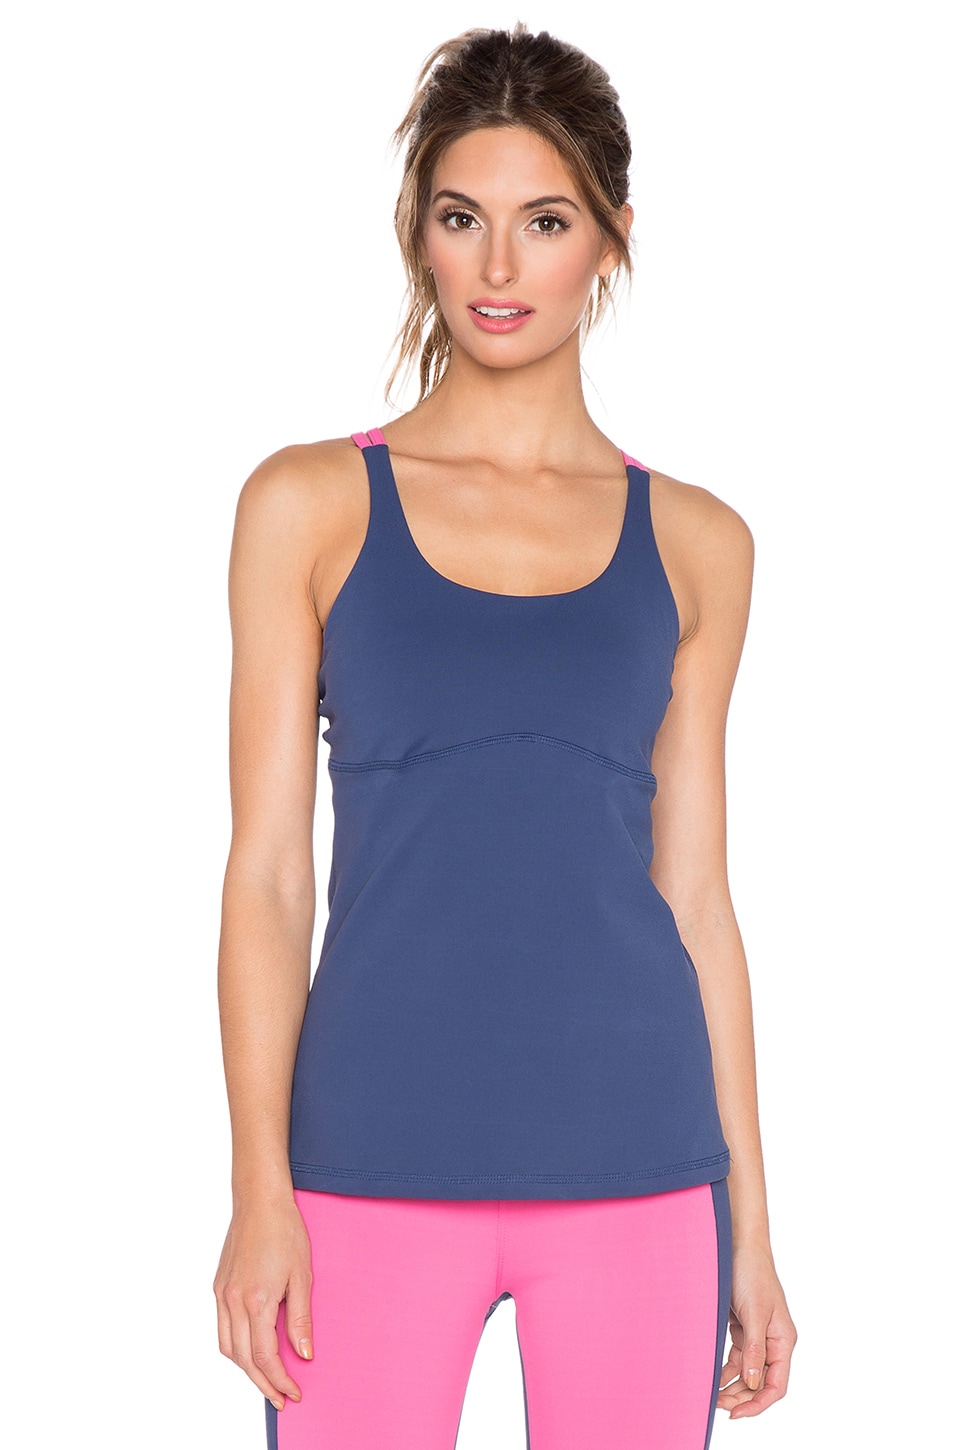 Rese Melanie Tank in Navy & Candy Pink | REVOLVE